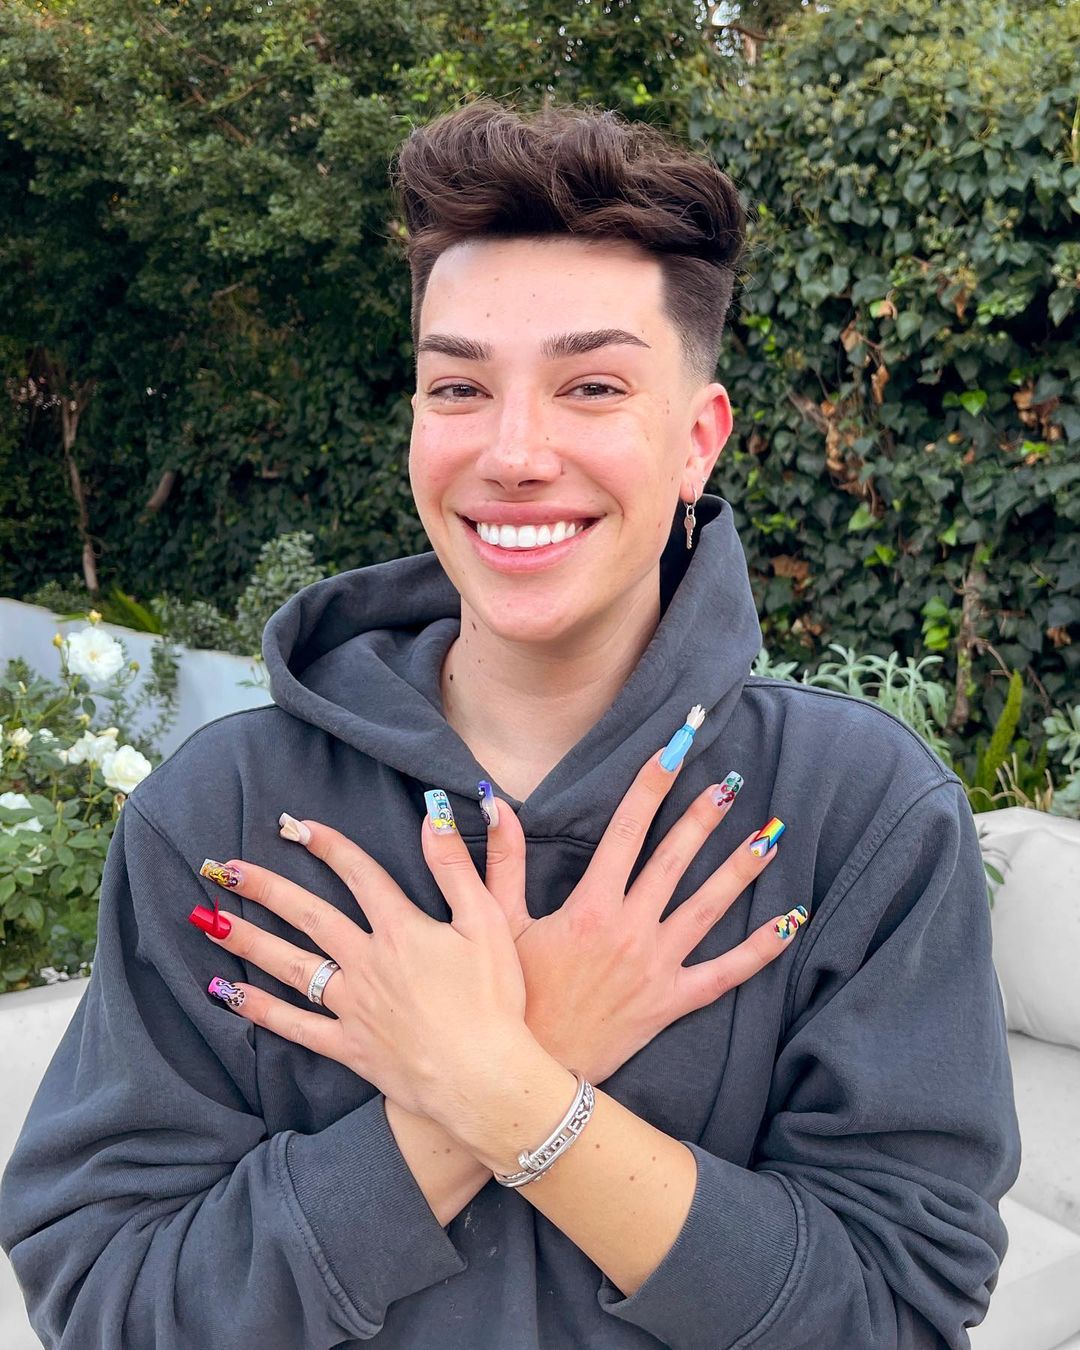 James Charles: Top 15 most influential beauty gurus in the world